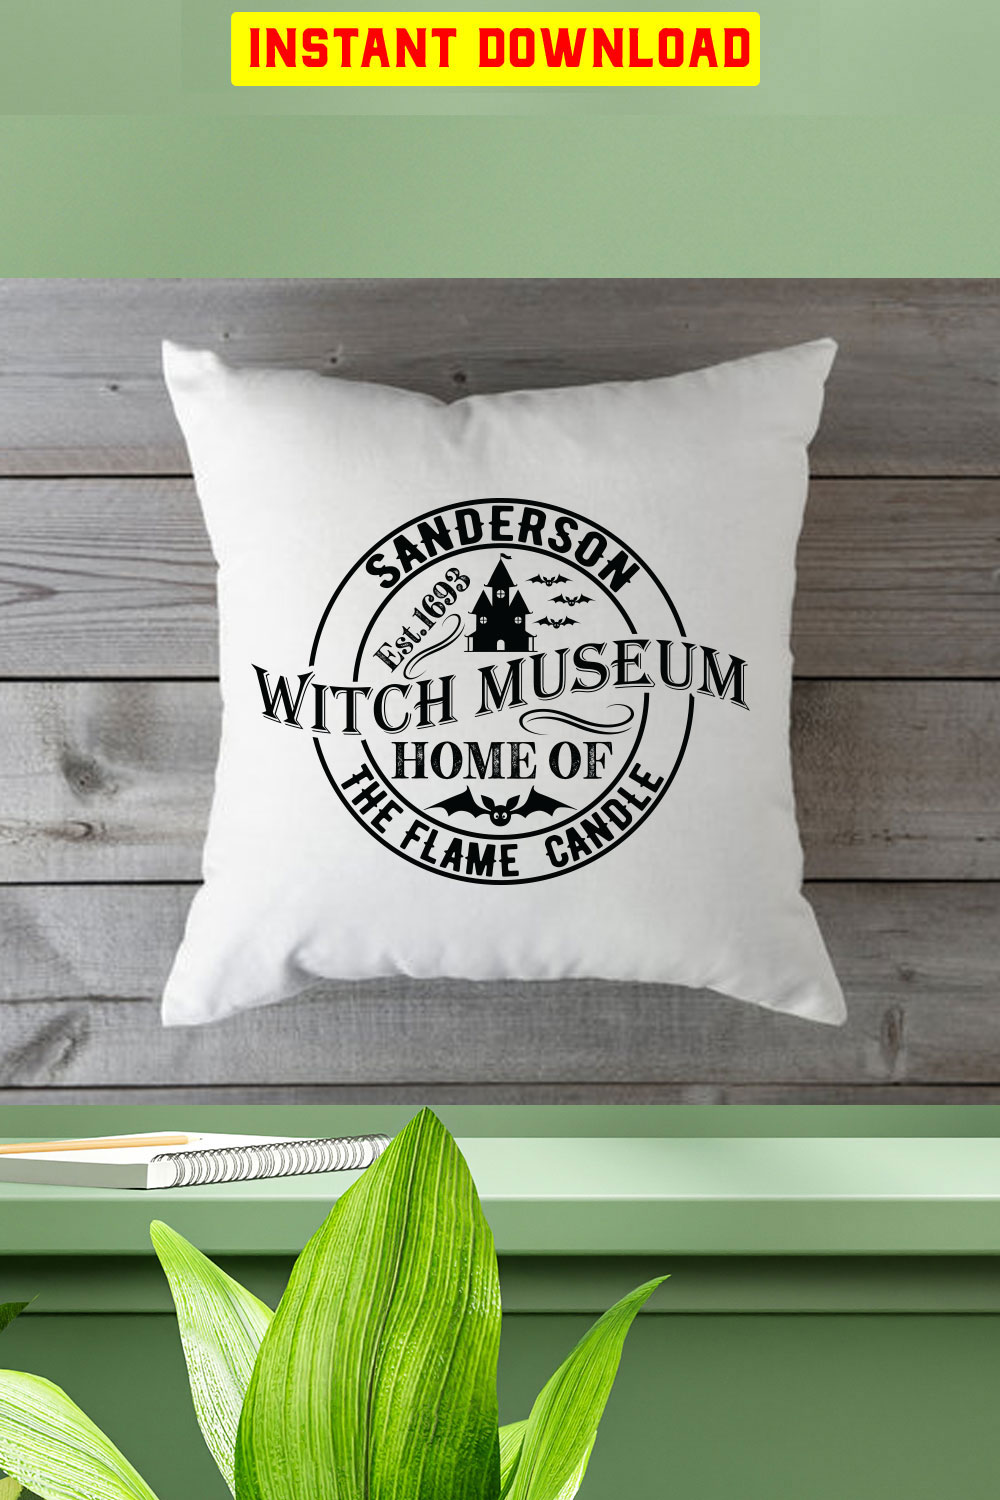 Sanderson Est1693 Witch Museum Home Of The Flame Candle pinterest preview image.